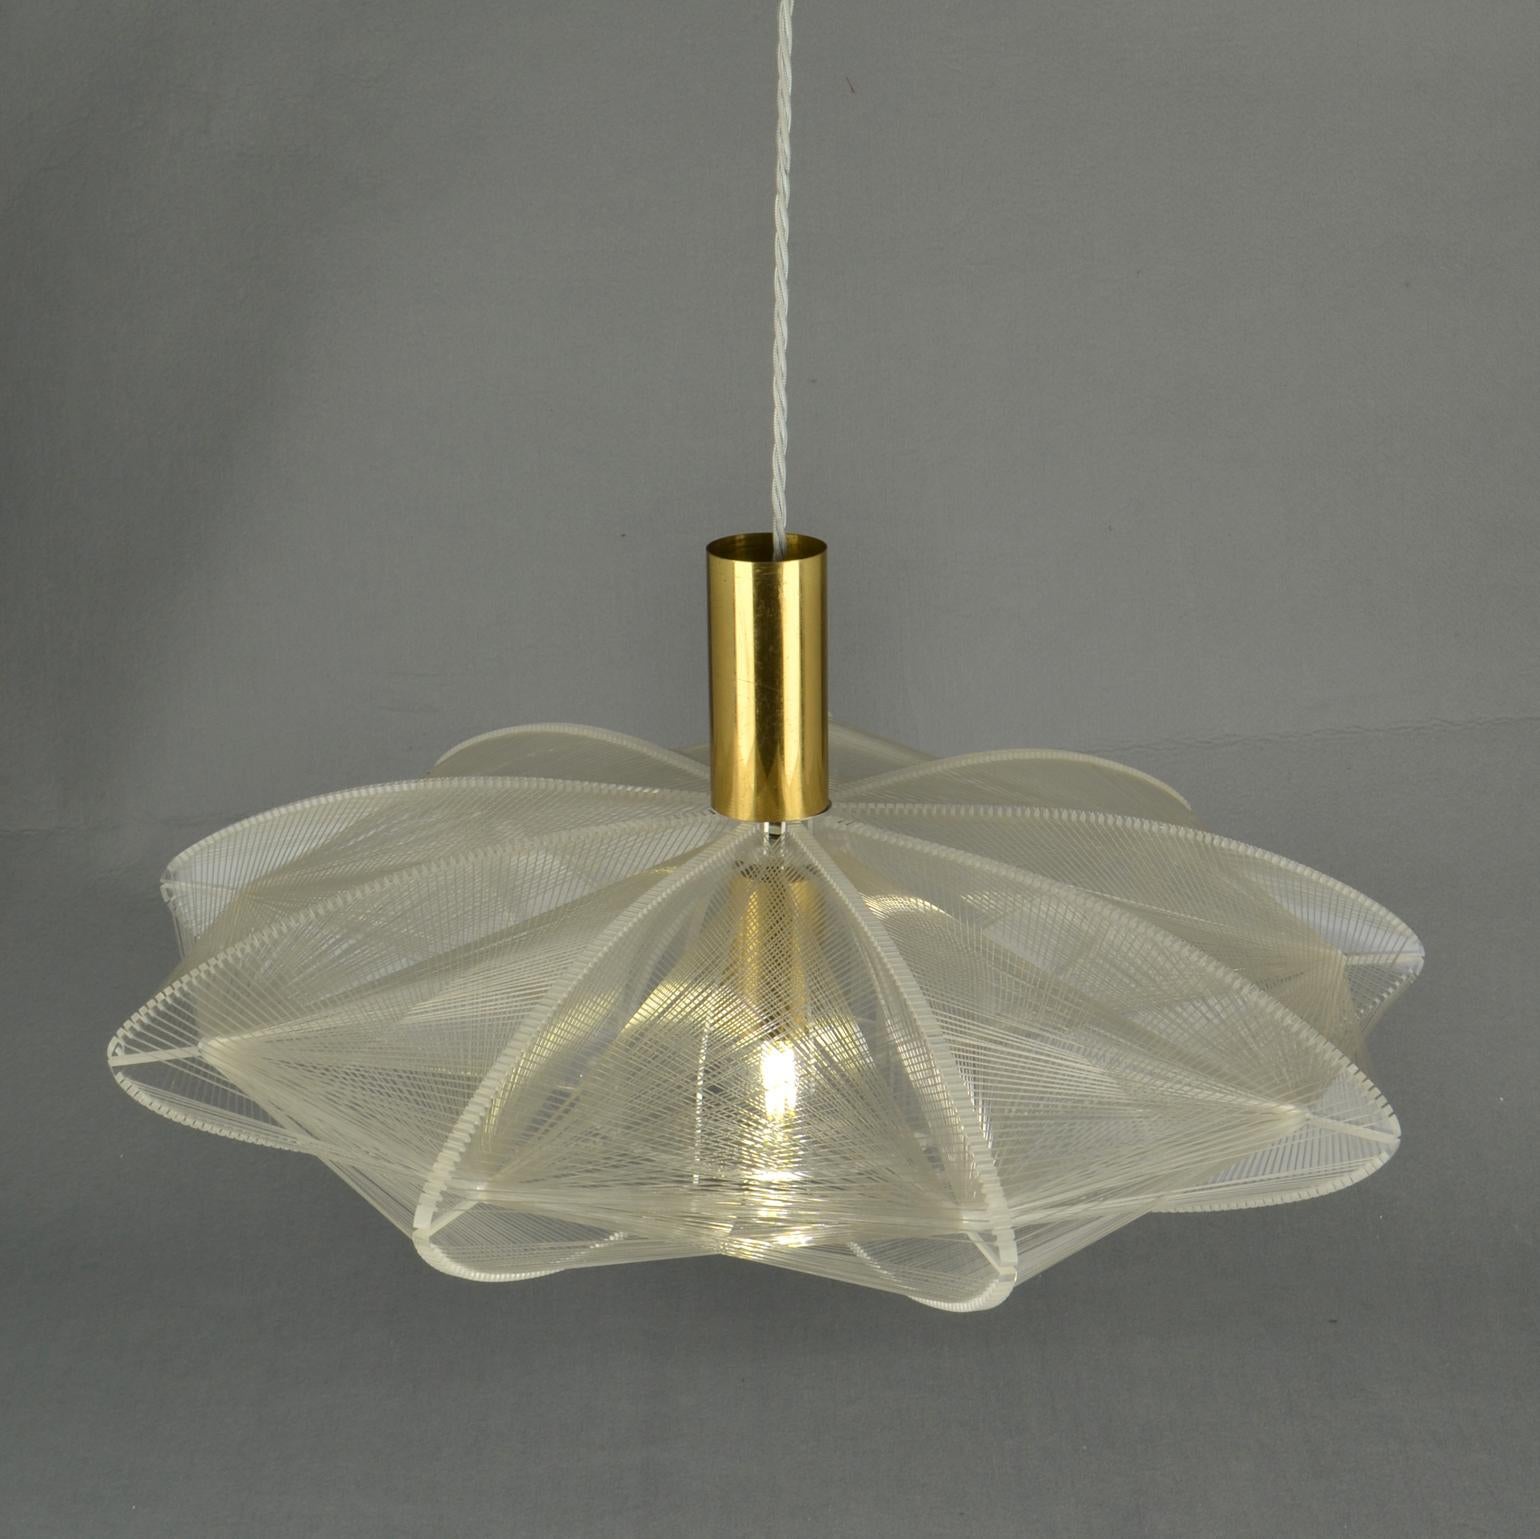 European Mid Century Modern Pendant Lamp in Lucite, Wire and Brass For Sale